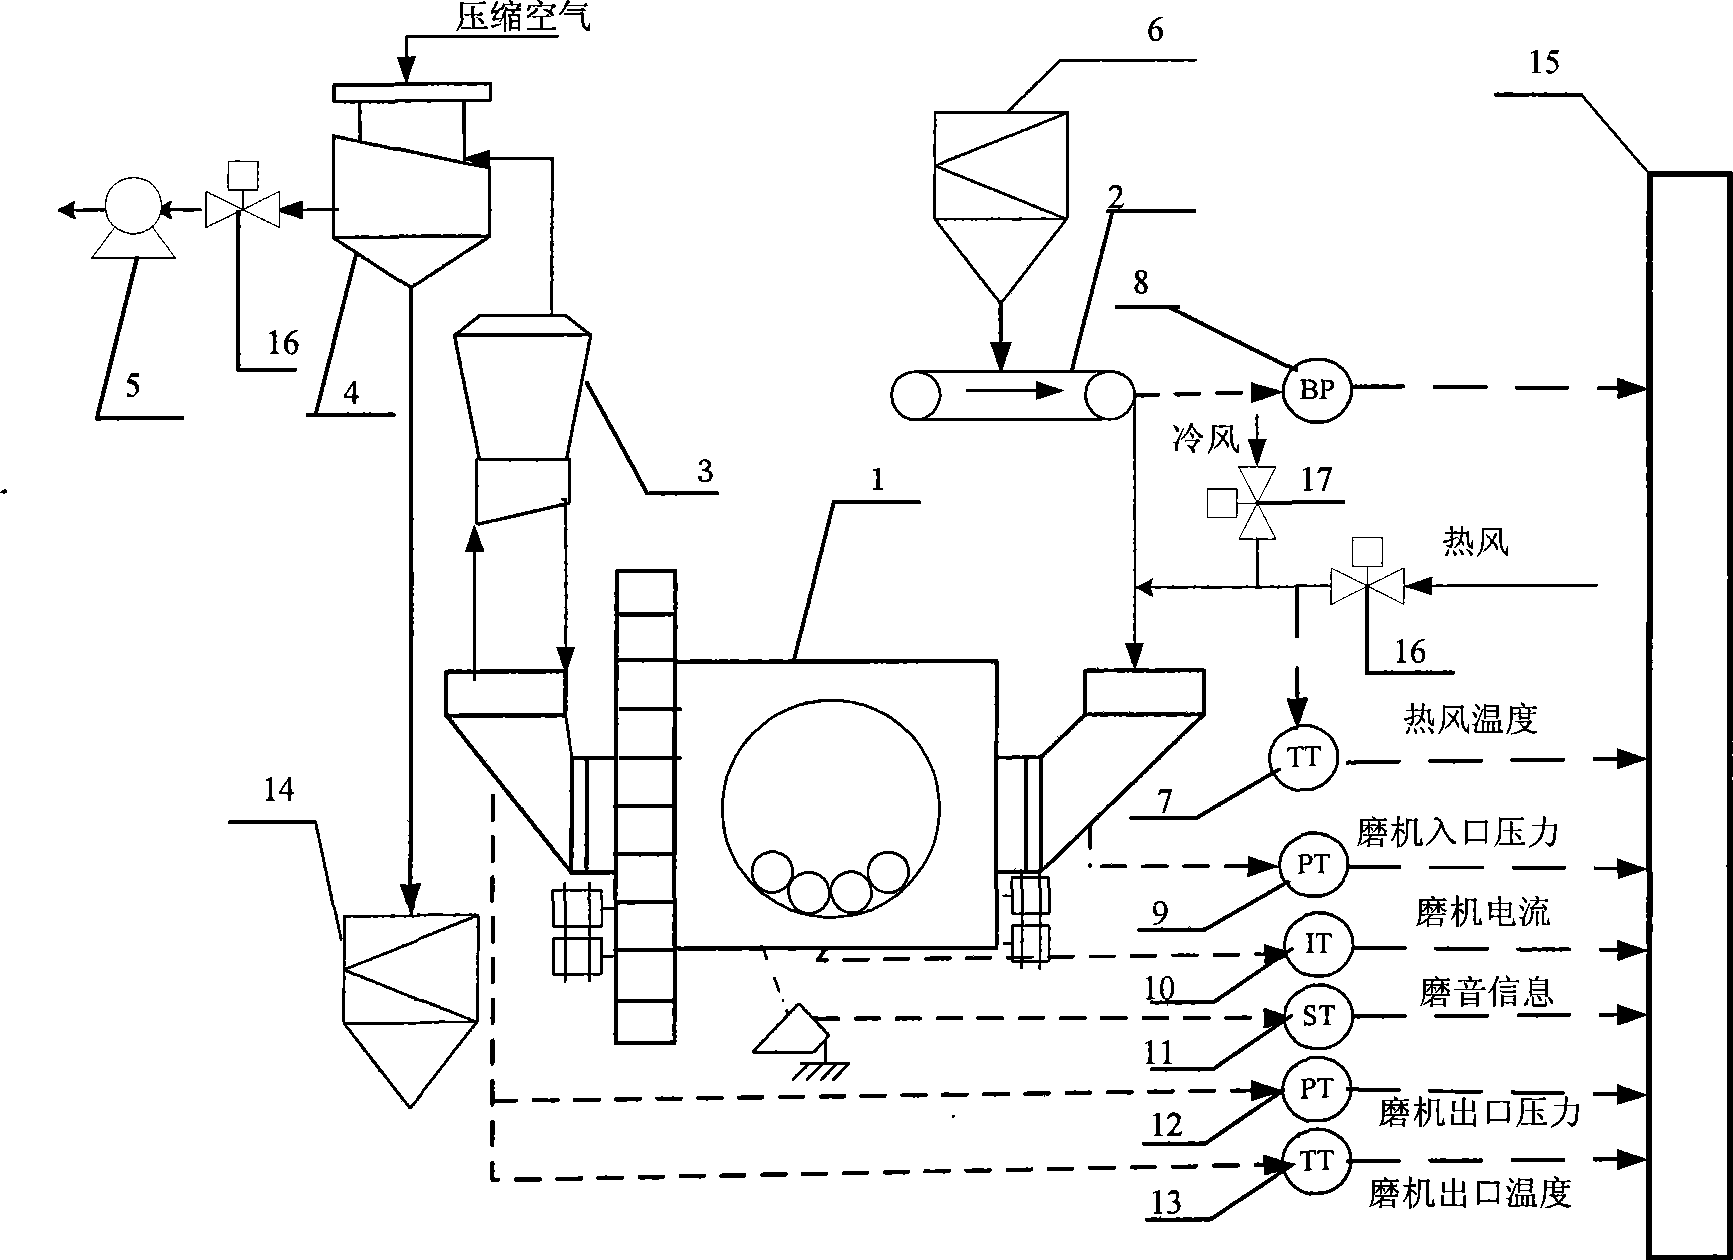 Middle-storage low speed coal mill load switch control method